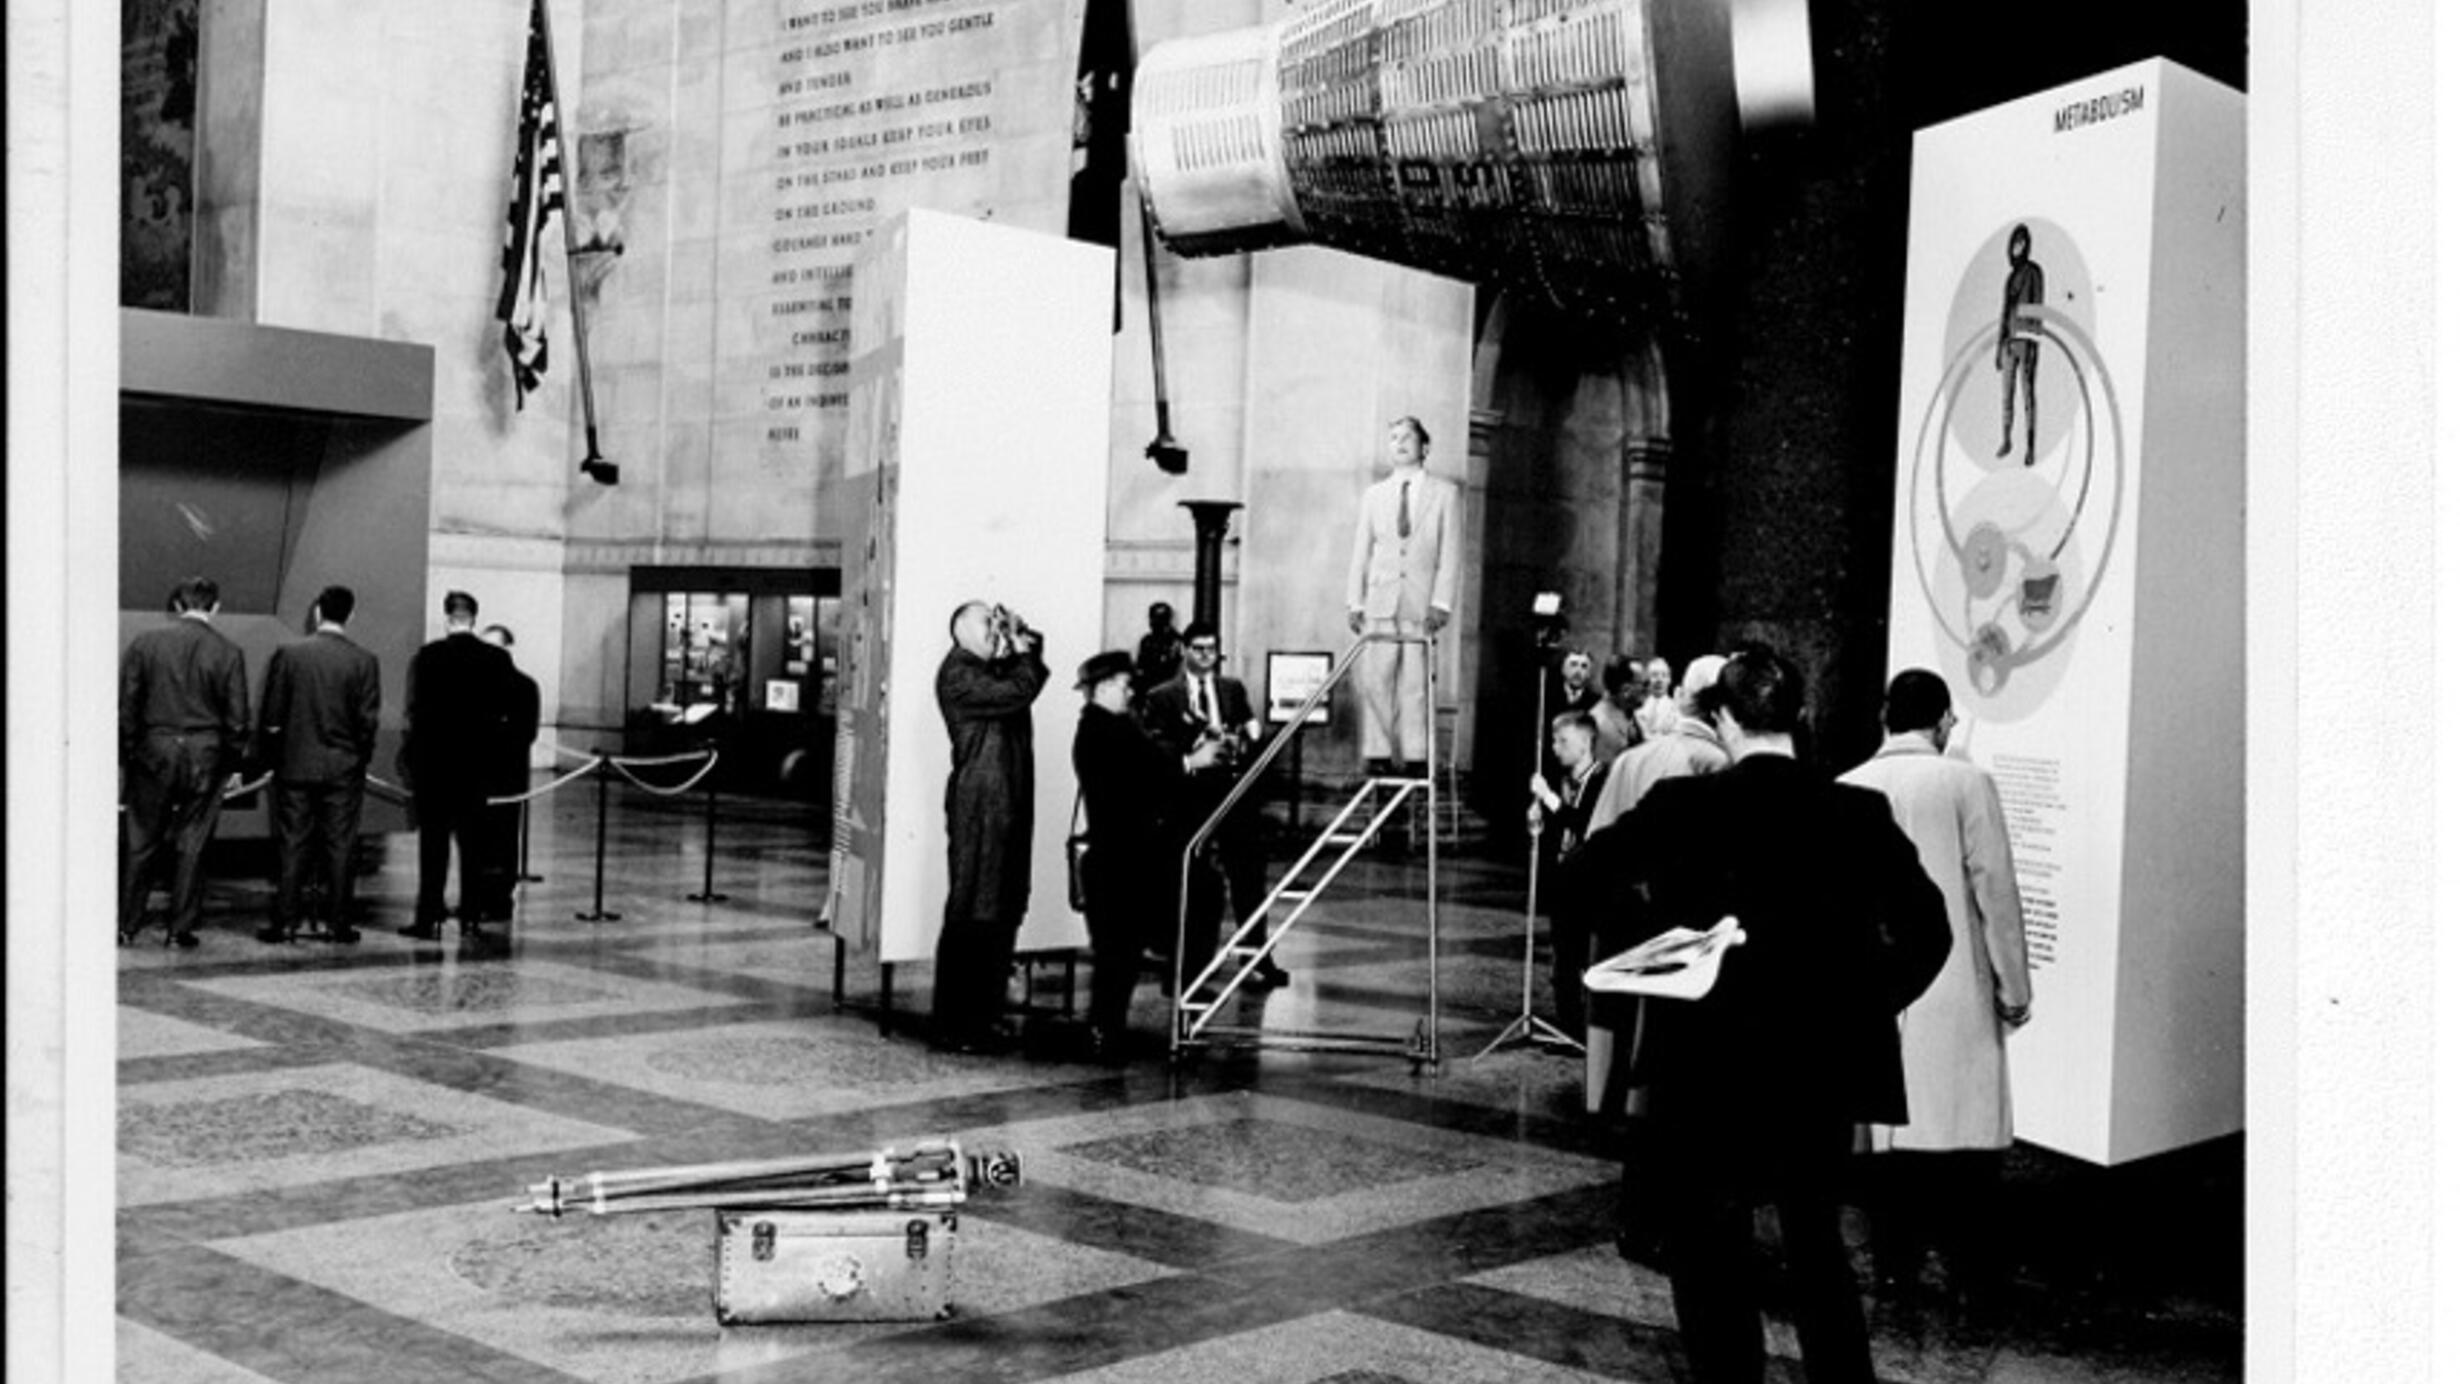 Image showing Man in Space exhibit, 1961